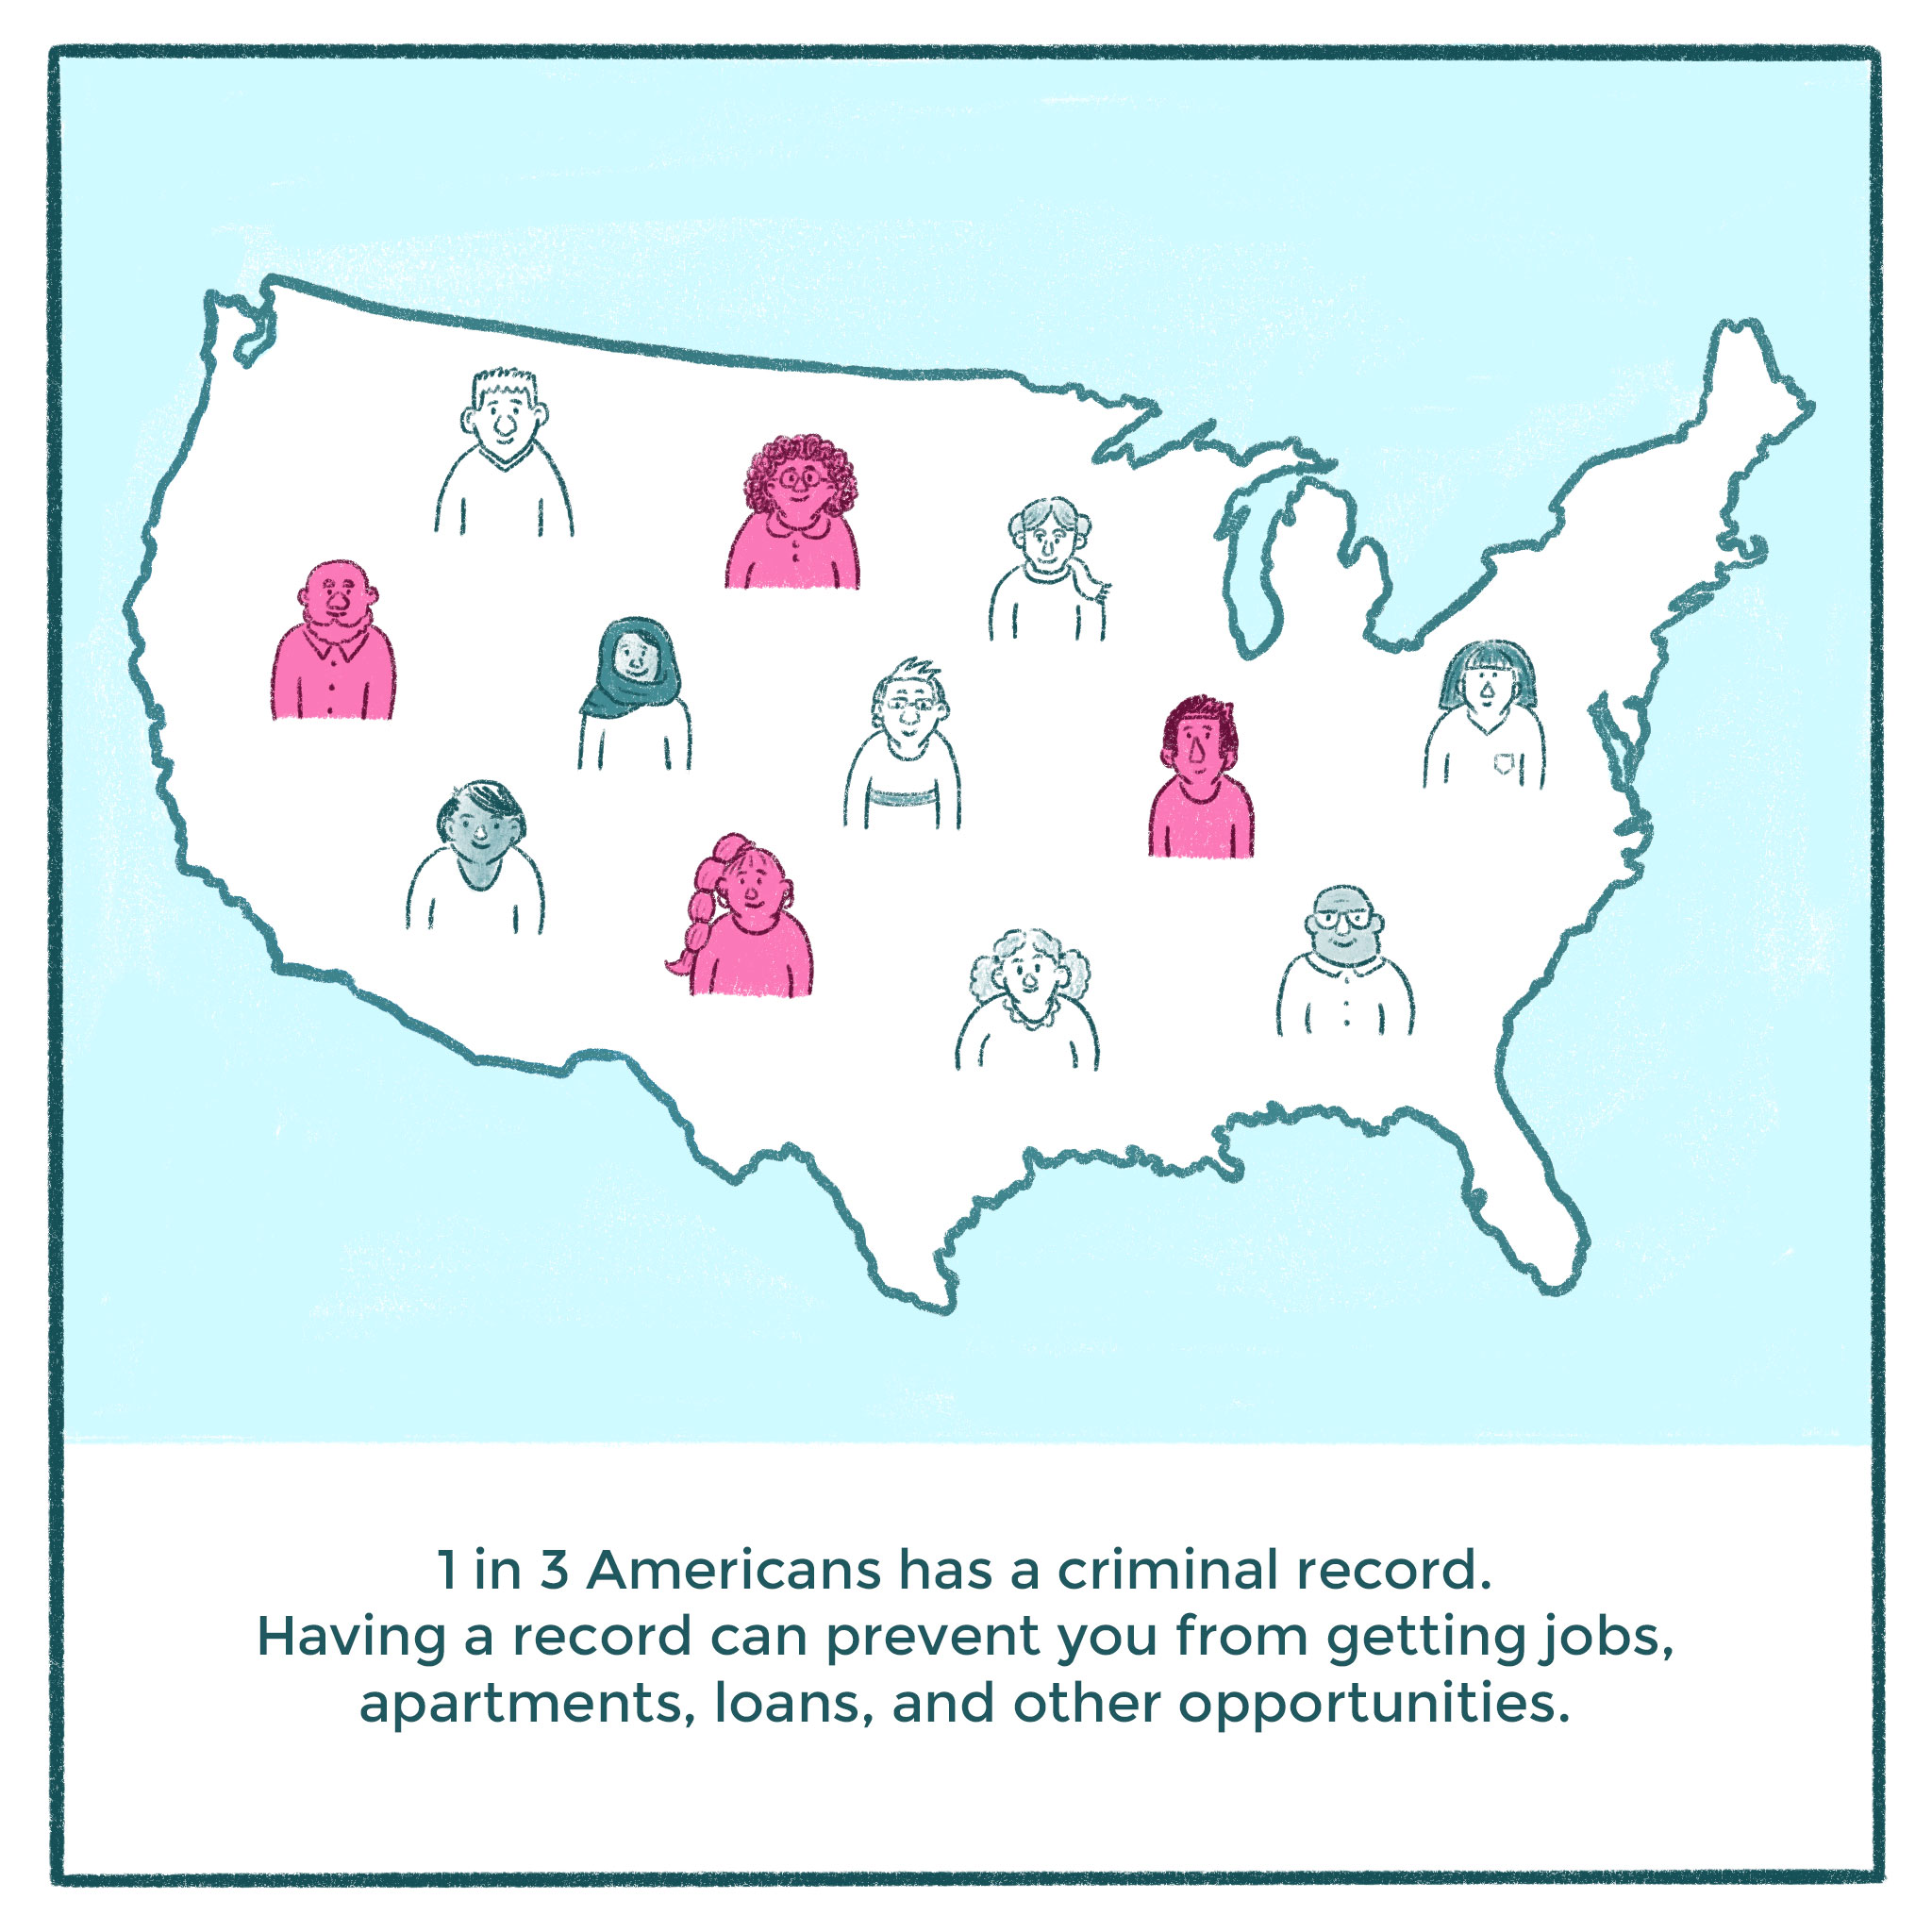 Image: Illustration of people within outline of the United States. Text: 1 in 3 Americans has a criminal record. Having a record can prevent you from getting jobs, apartments, loans, and other opportunities.